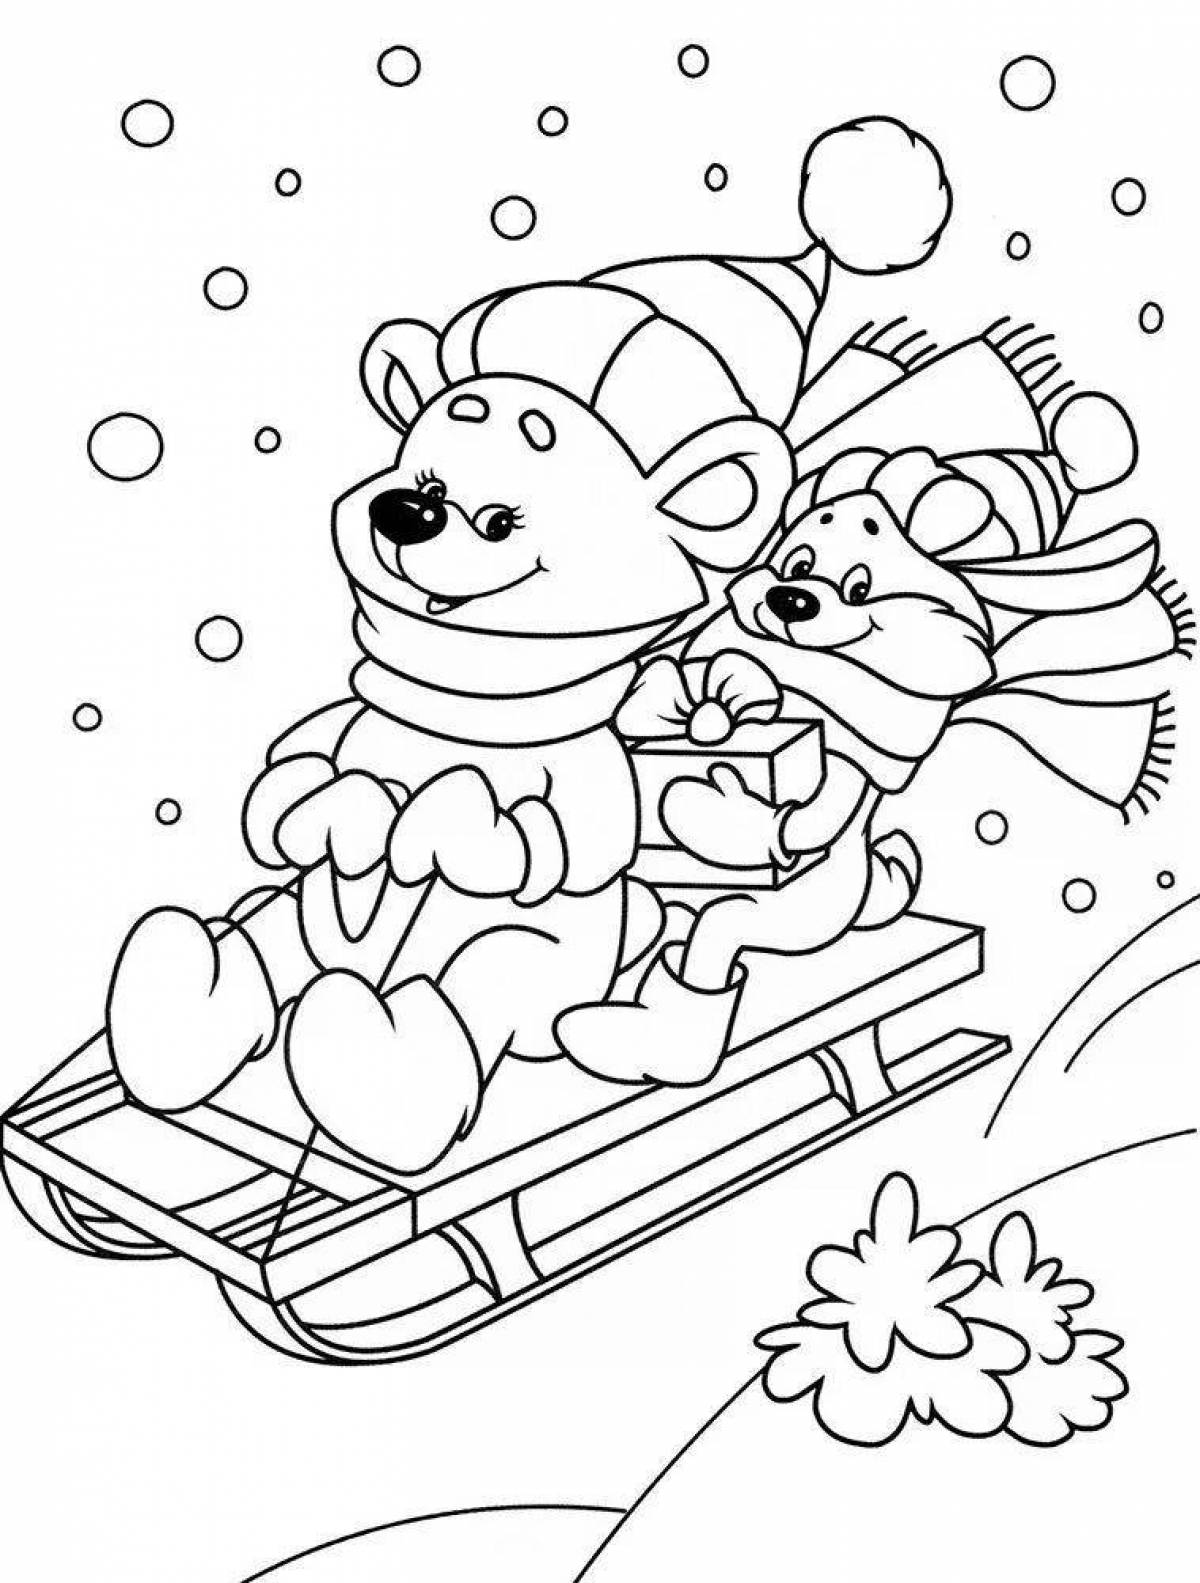 Exquisite winter Christmas coloring book